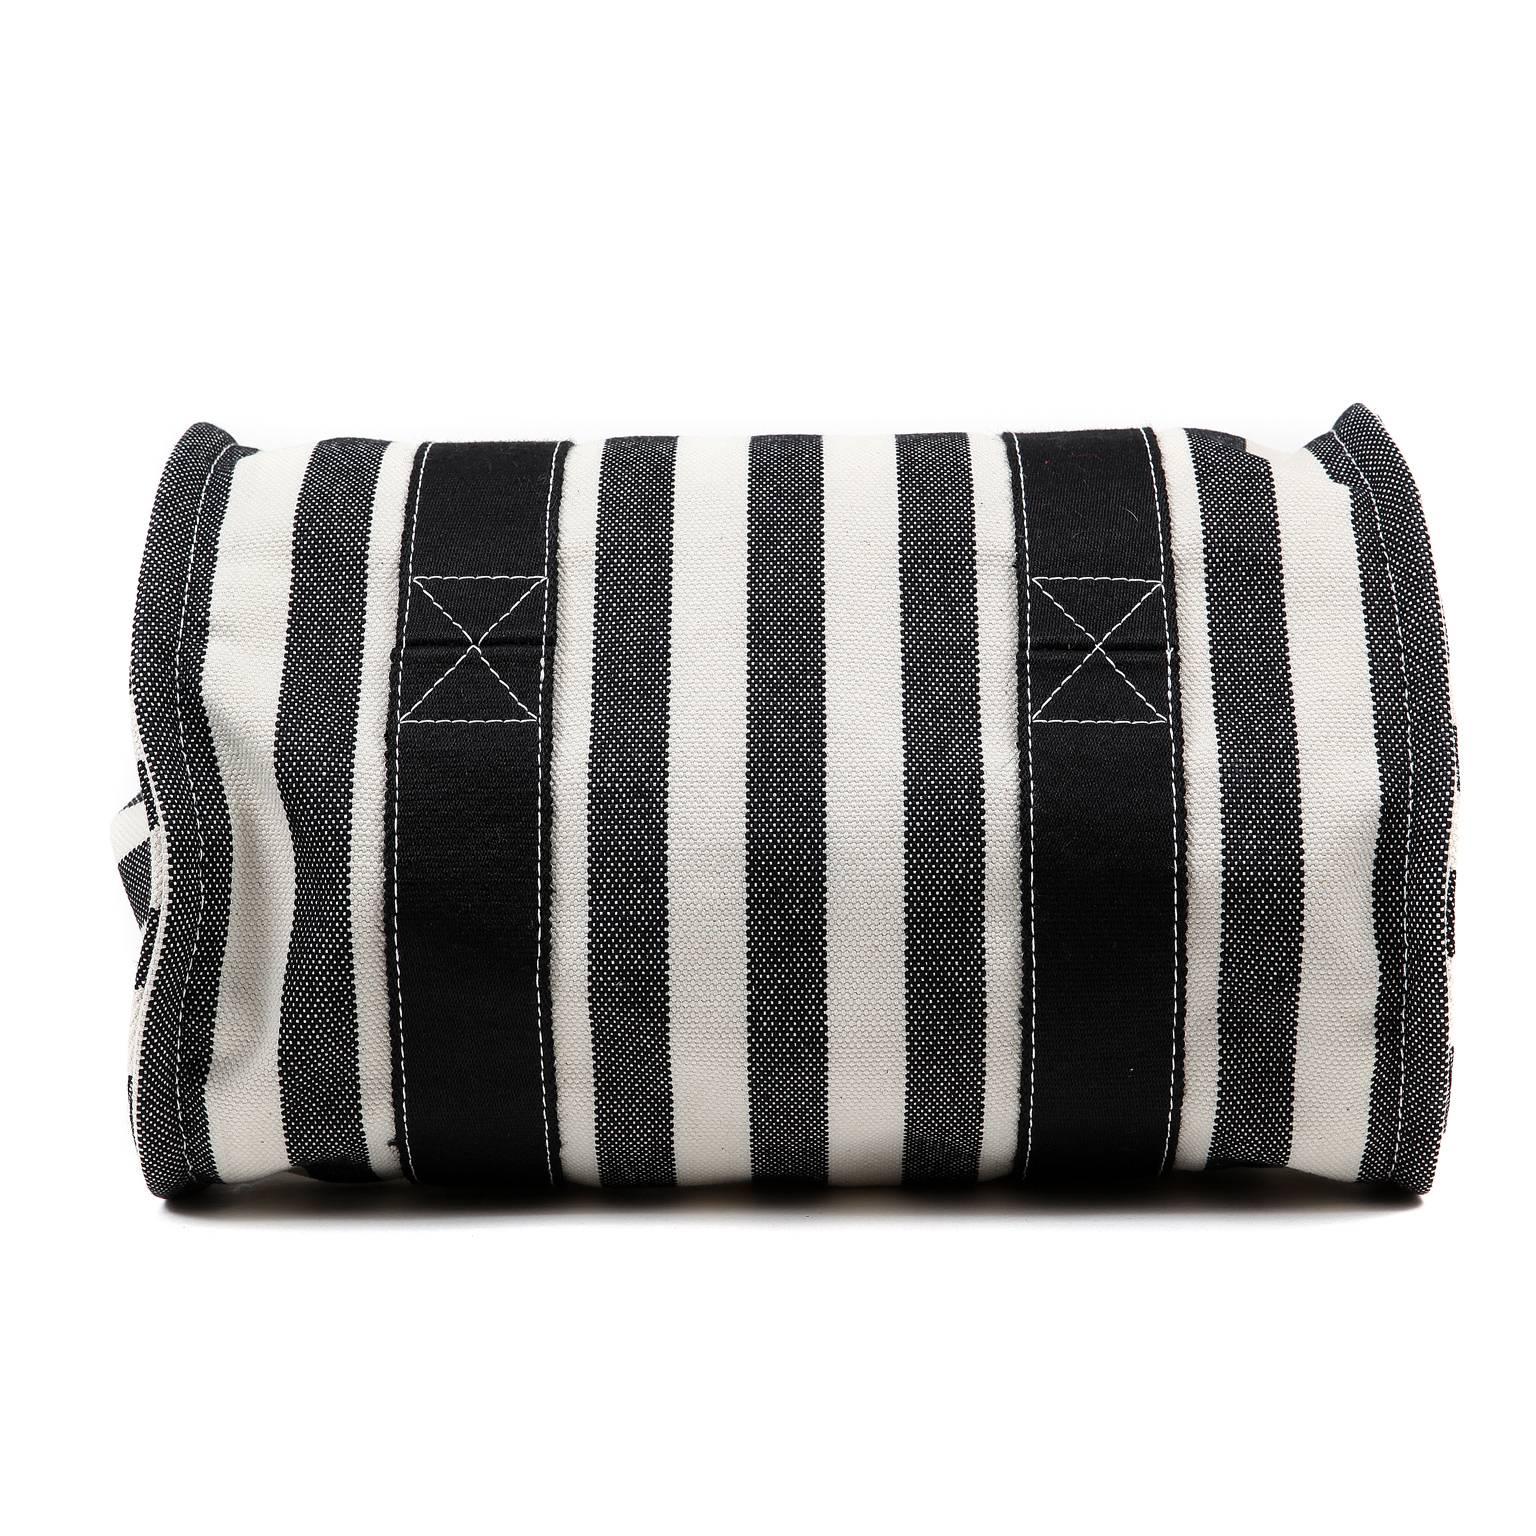 Hermes Black and White Striped Canvas Tote with pochette In Excellent Condition For Sale In Malibu, CA